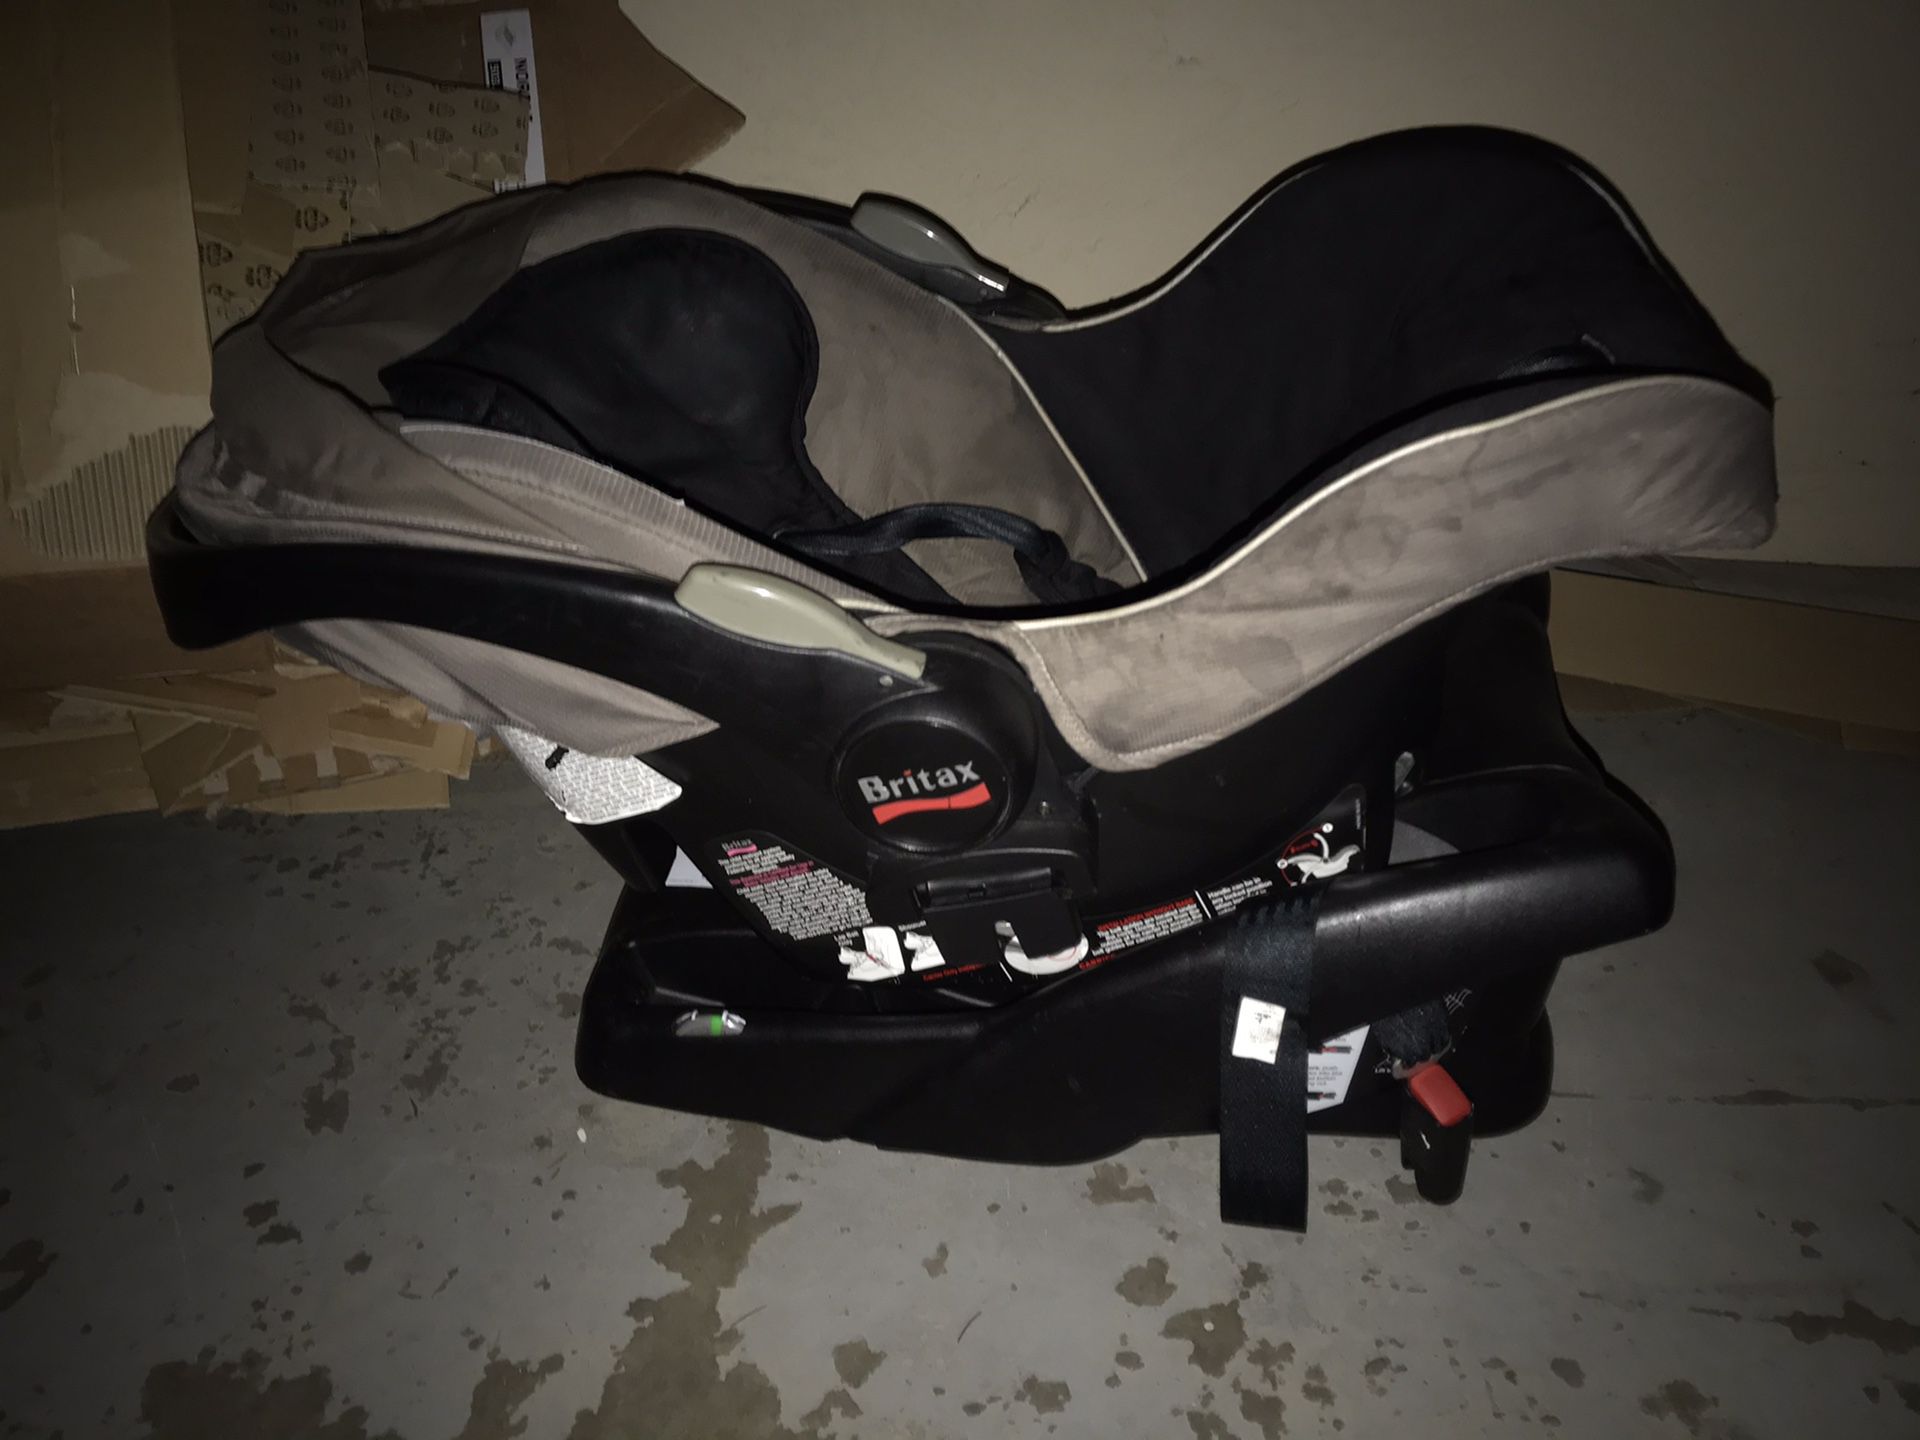 Britax Baby car seat and carrier